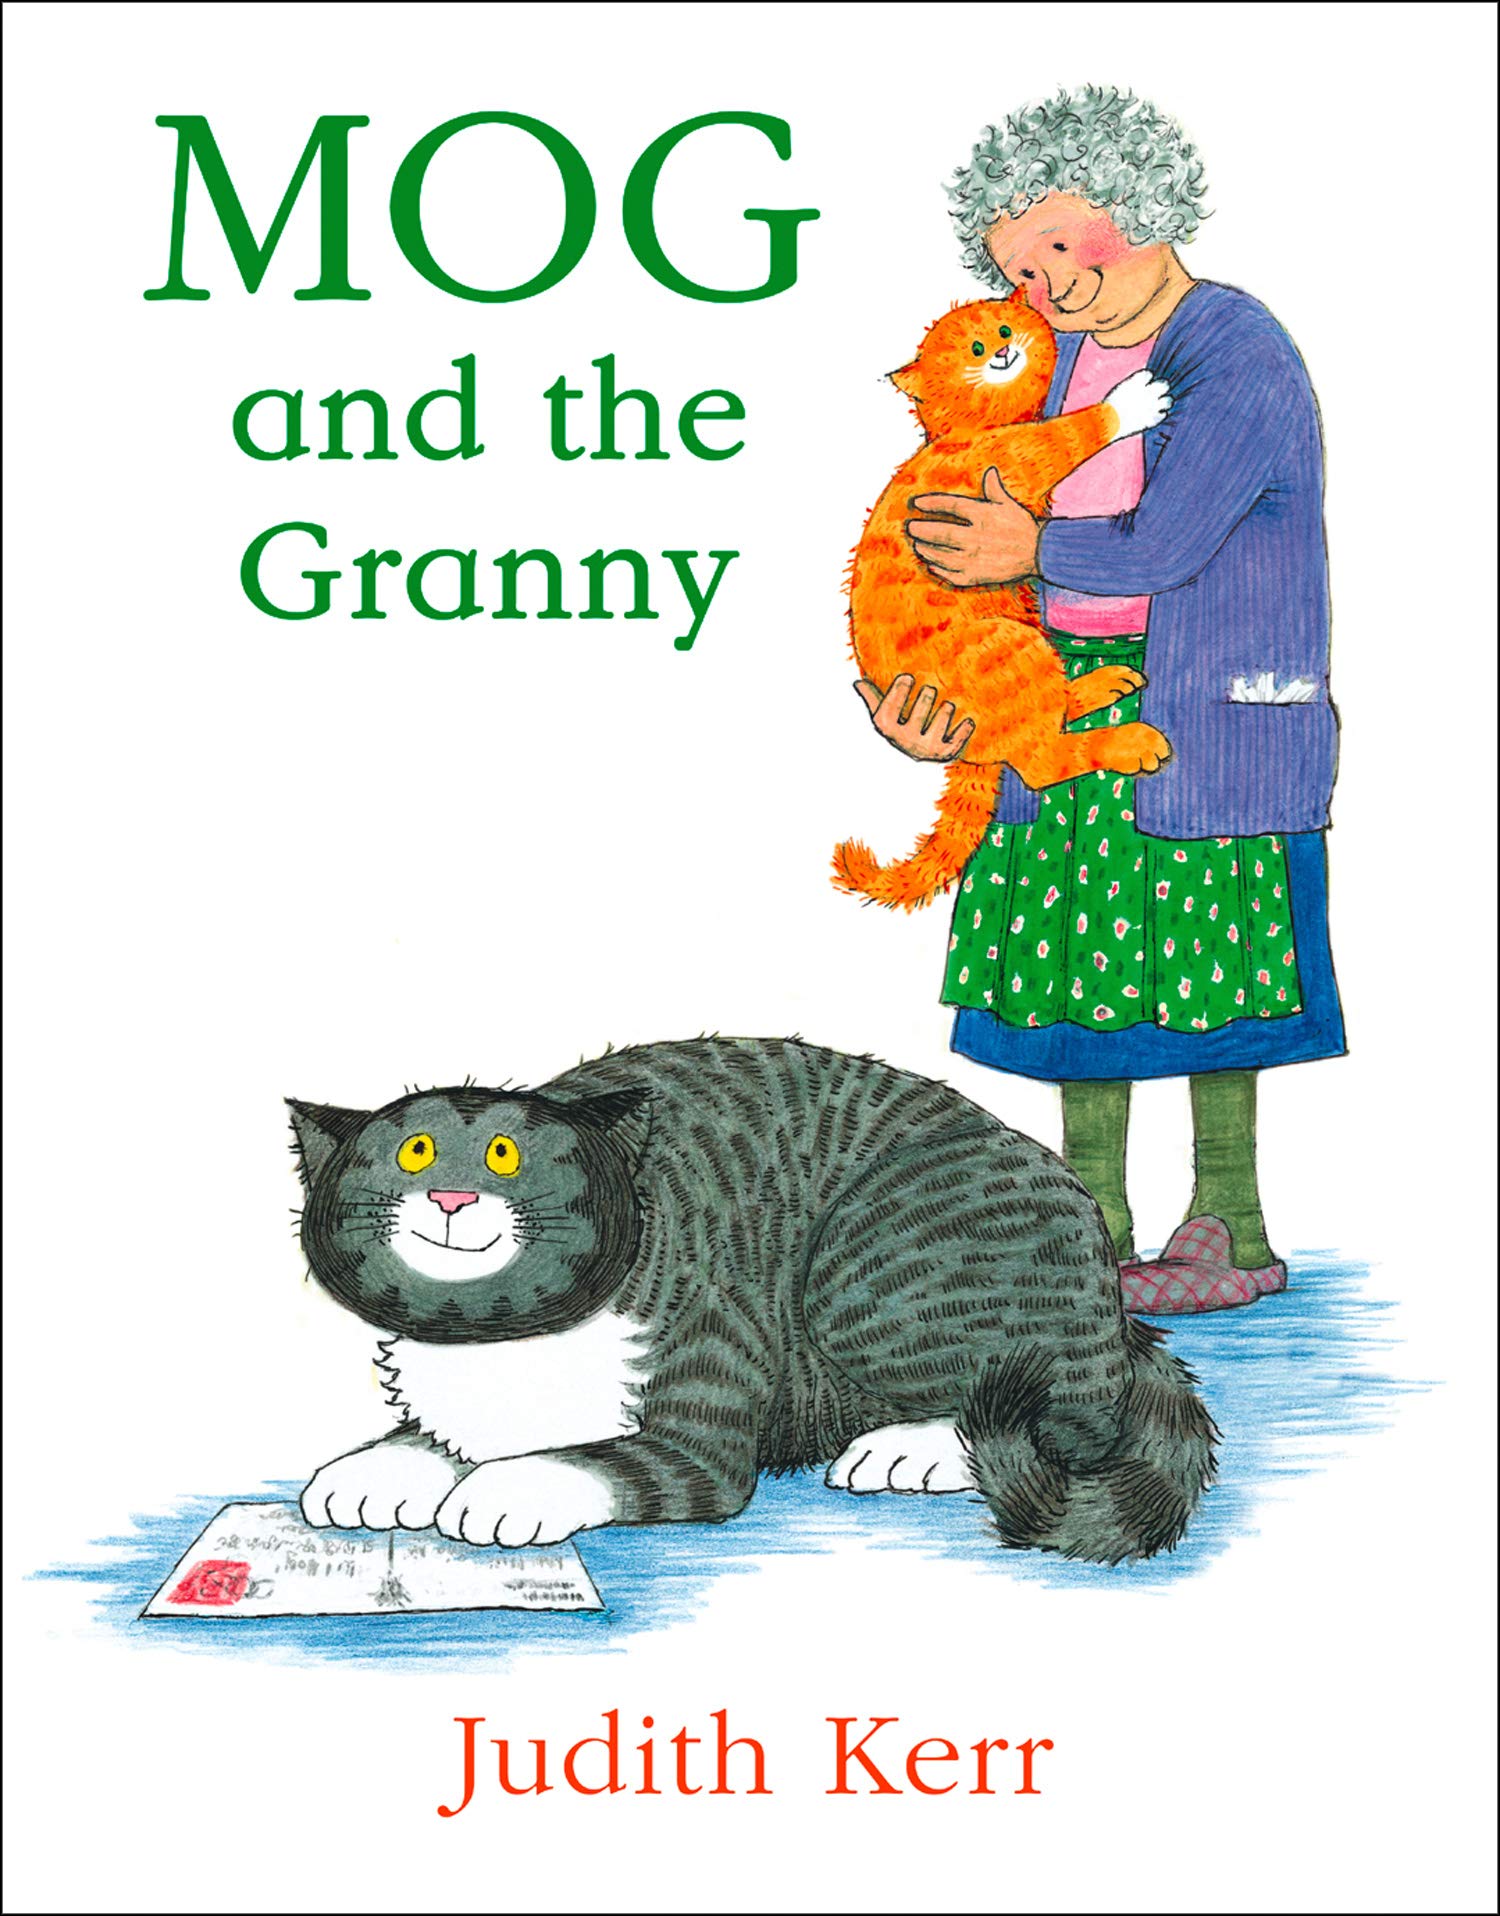 Mog and the Granny by Judith Kerr - tpbk